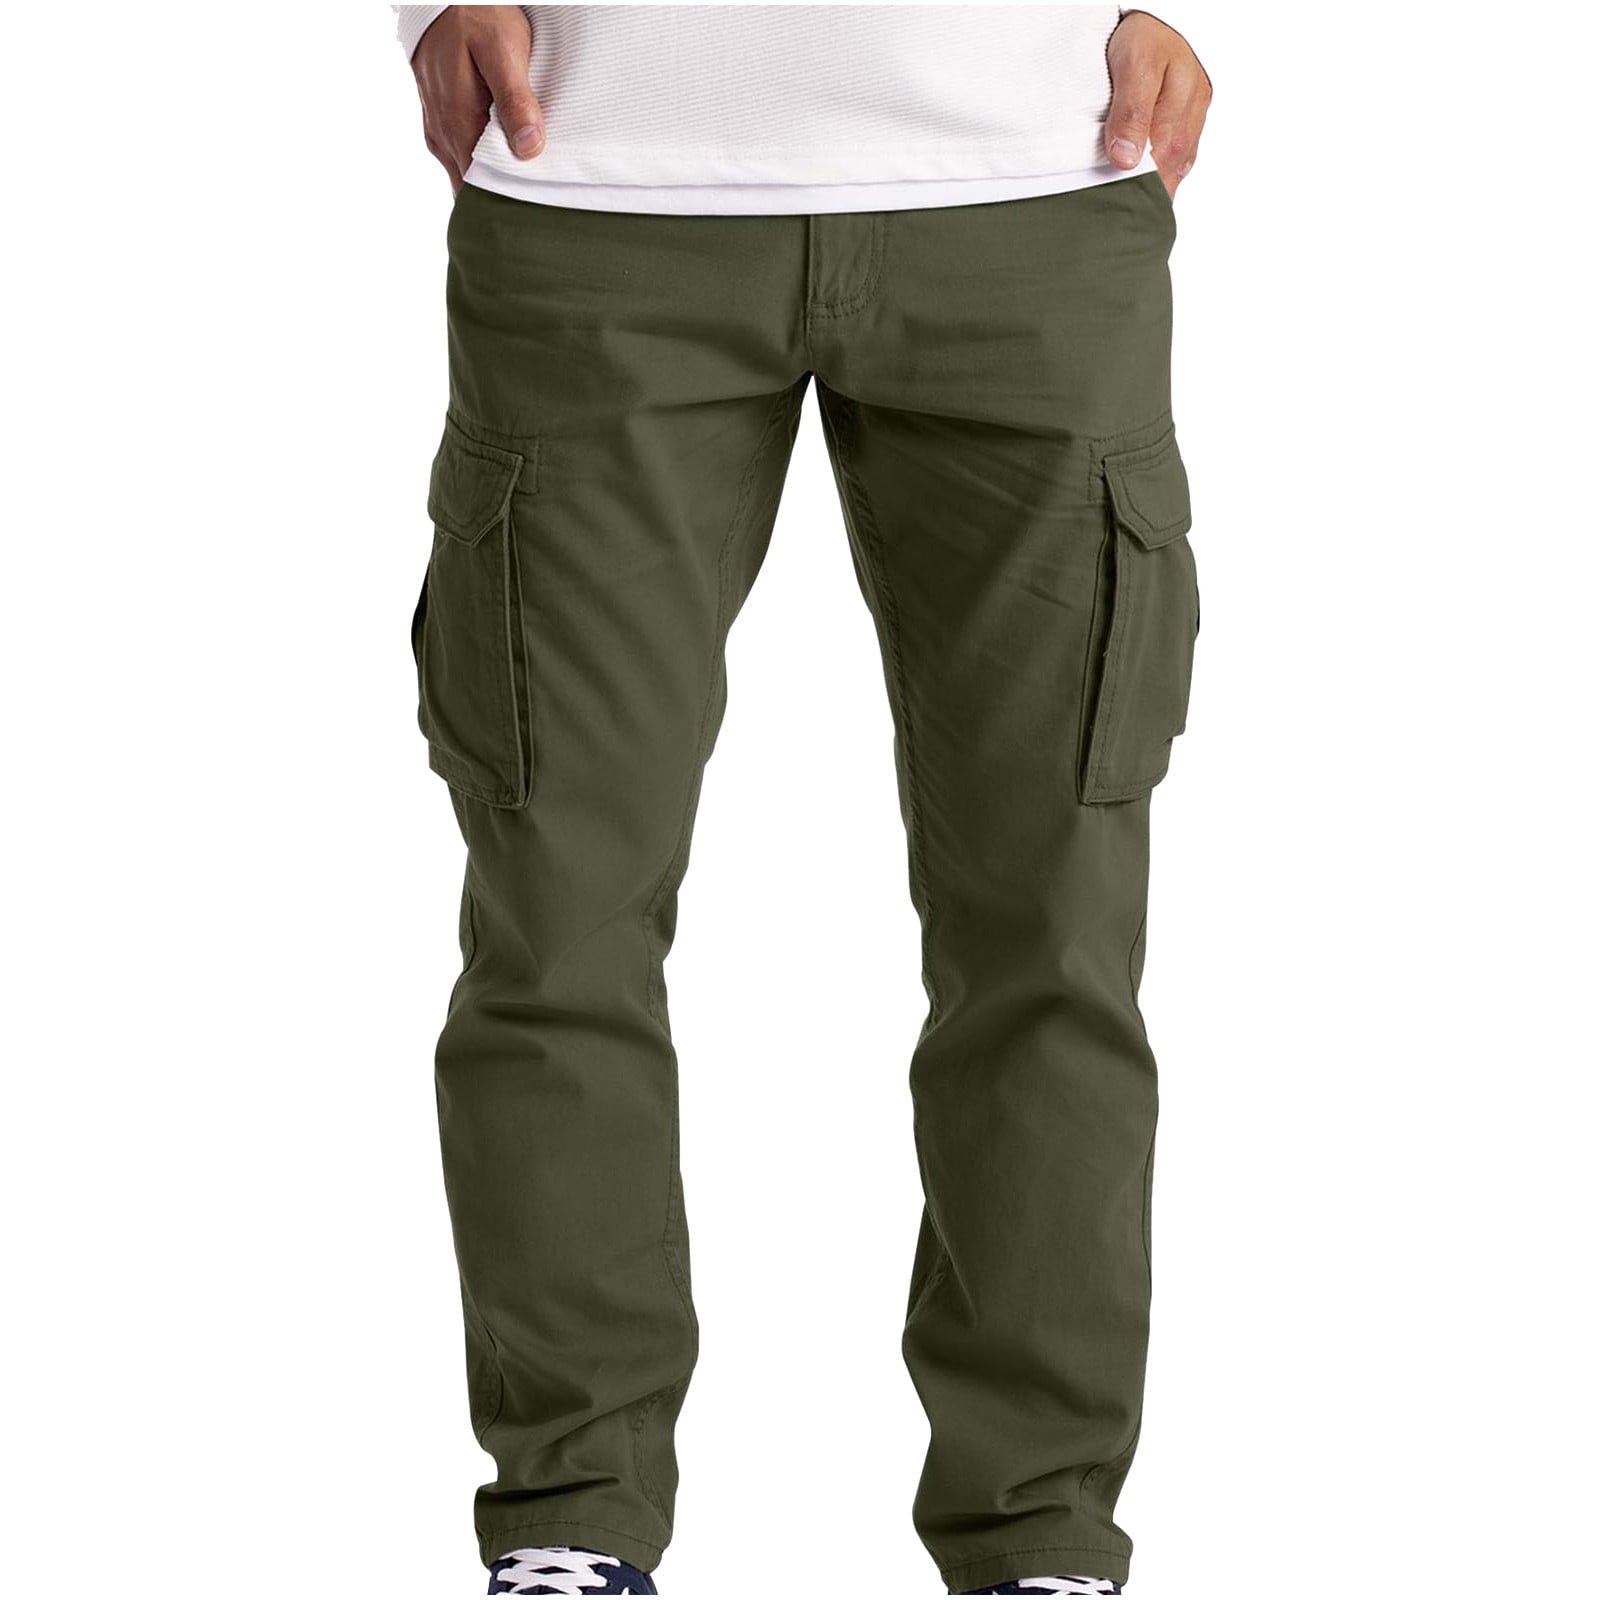 Hinvhai Clearance Men's Cargo Trousers Work Wear Combat Safety Cargo 6  Pocket Full Pants Army Green XXLXXL